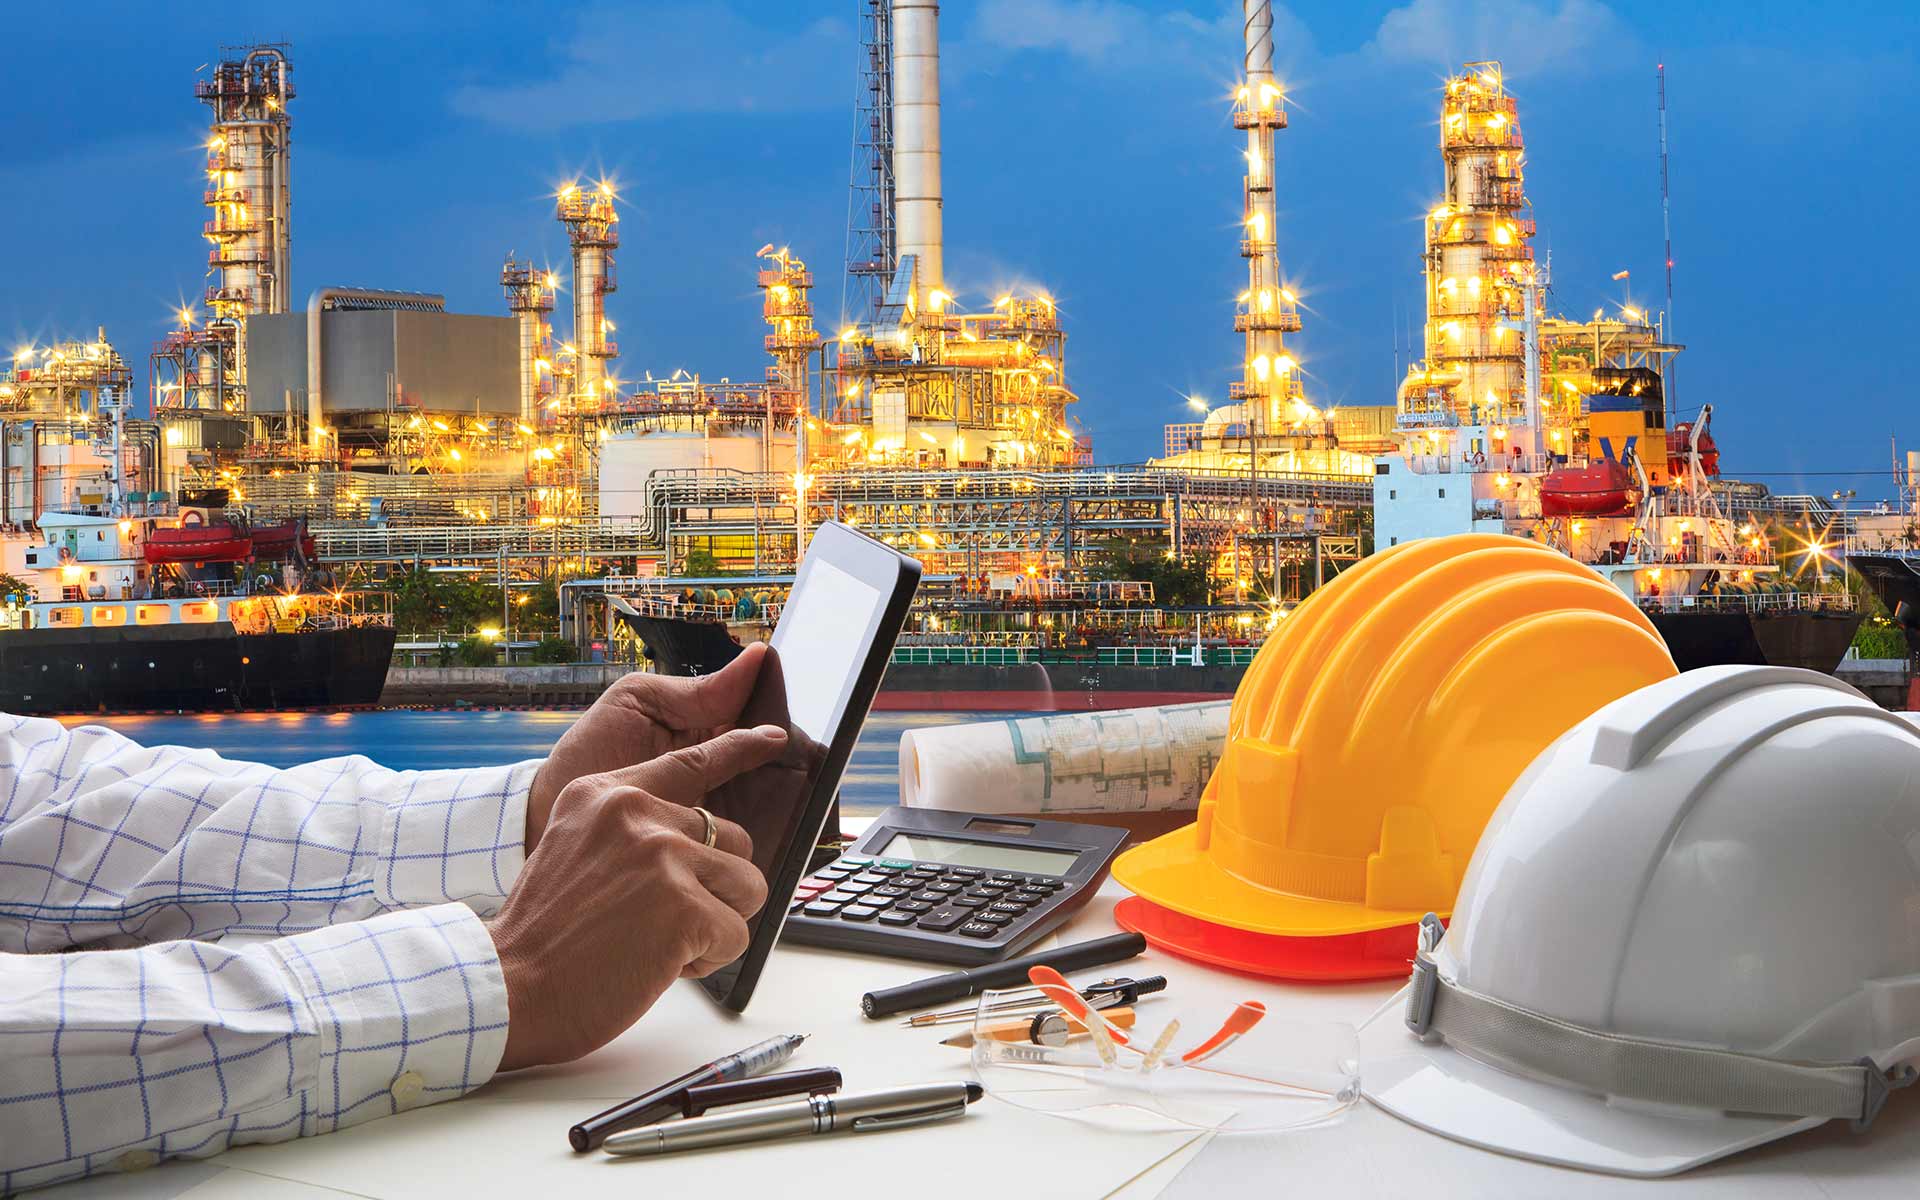 Industrial Automation for Oil & Gas Market Size, Status and Forecast